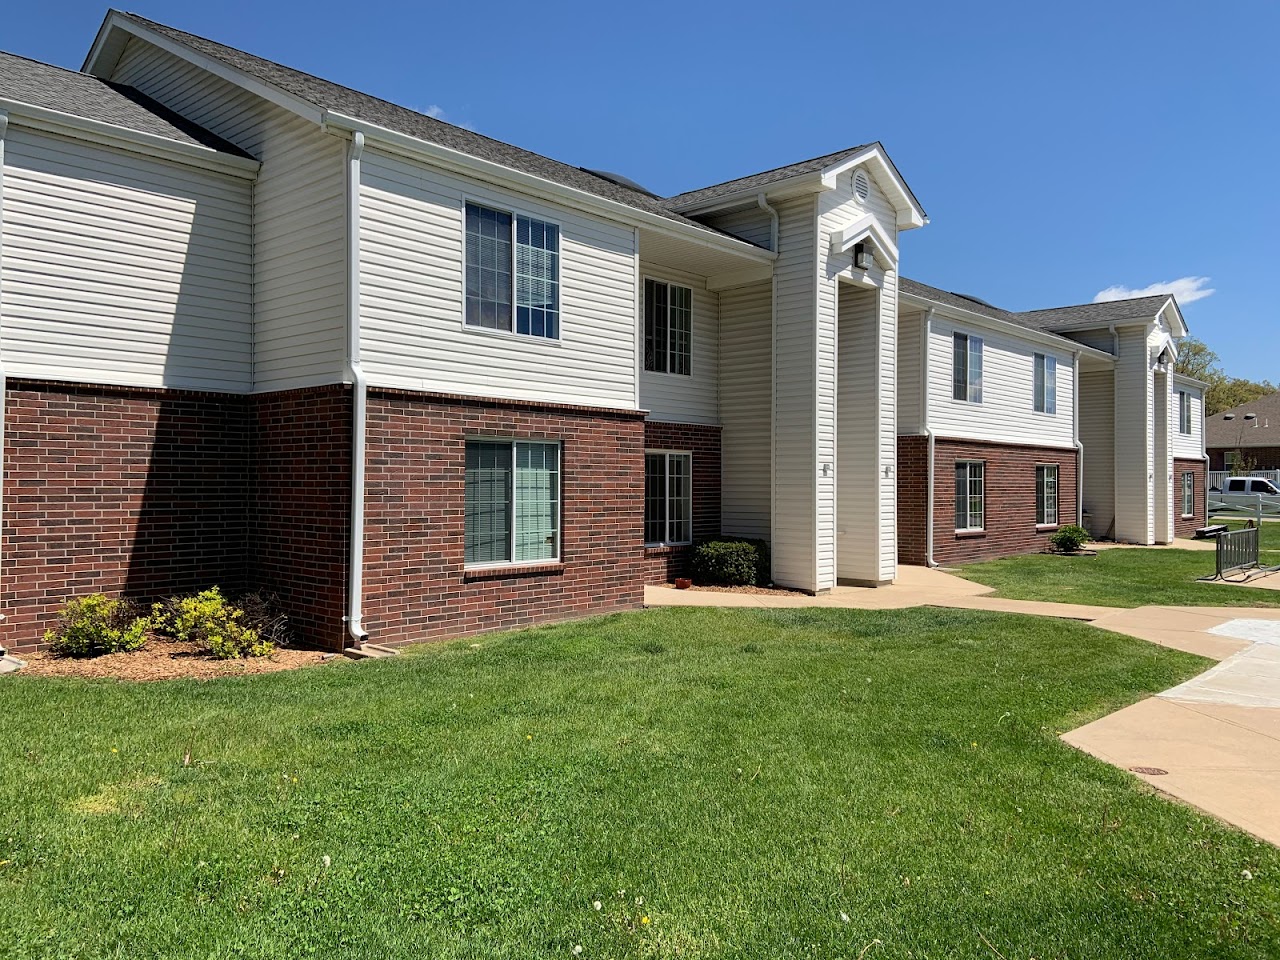 Photo of HAWTHORN VILLAGE. Affordable housing located at 1059 HAWTHORNE VILLAGE DR WARRENTON, MO 63383